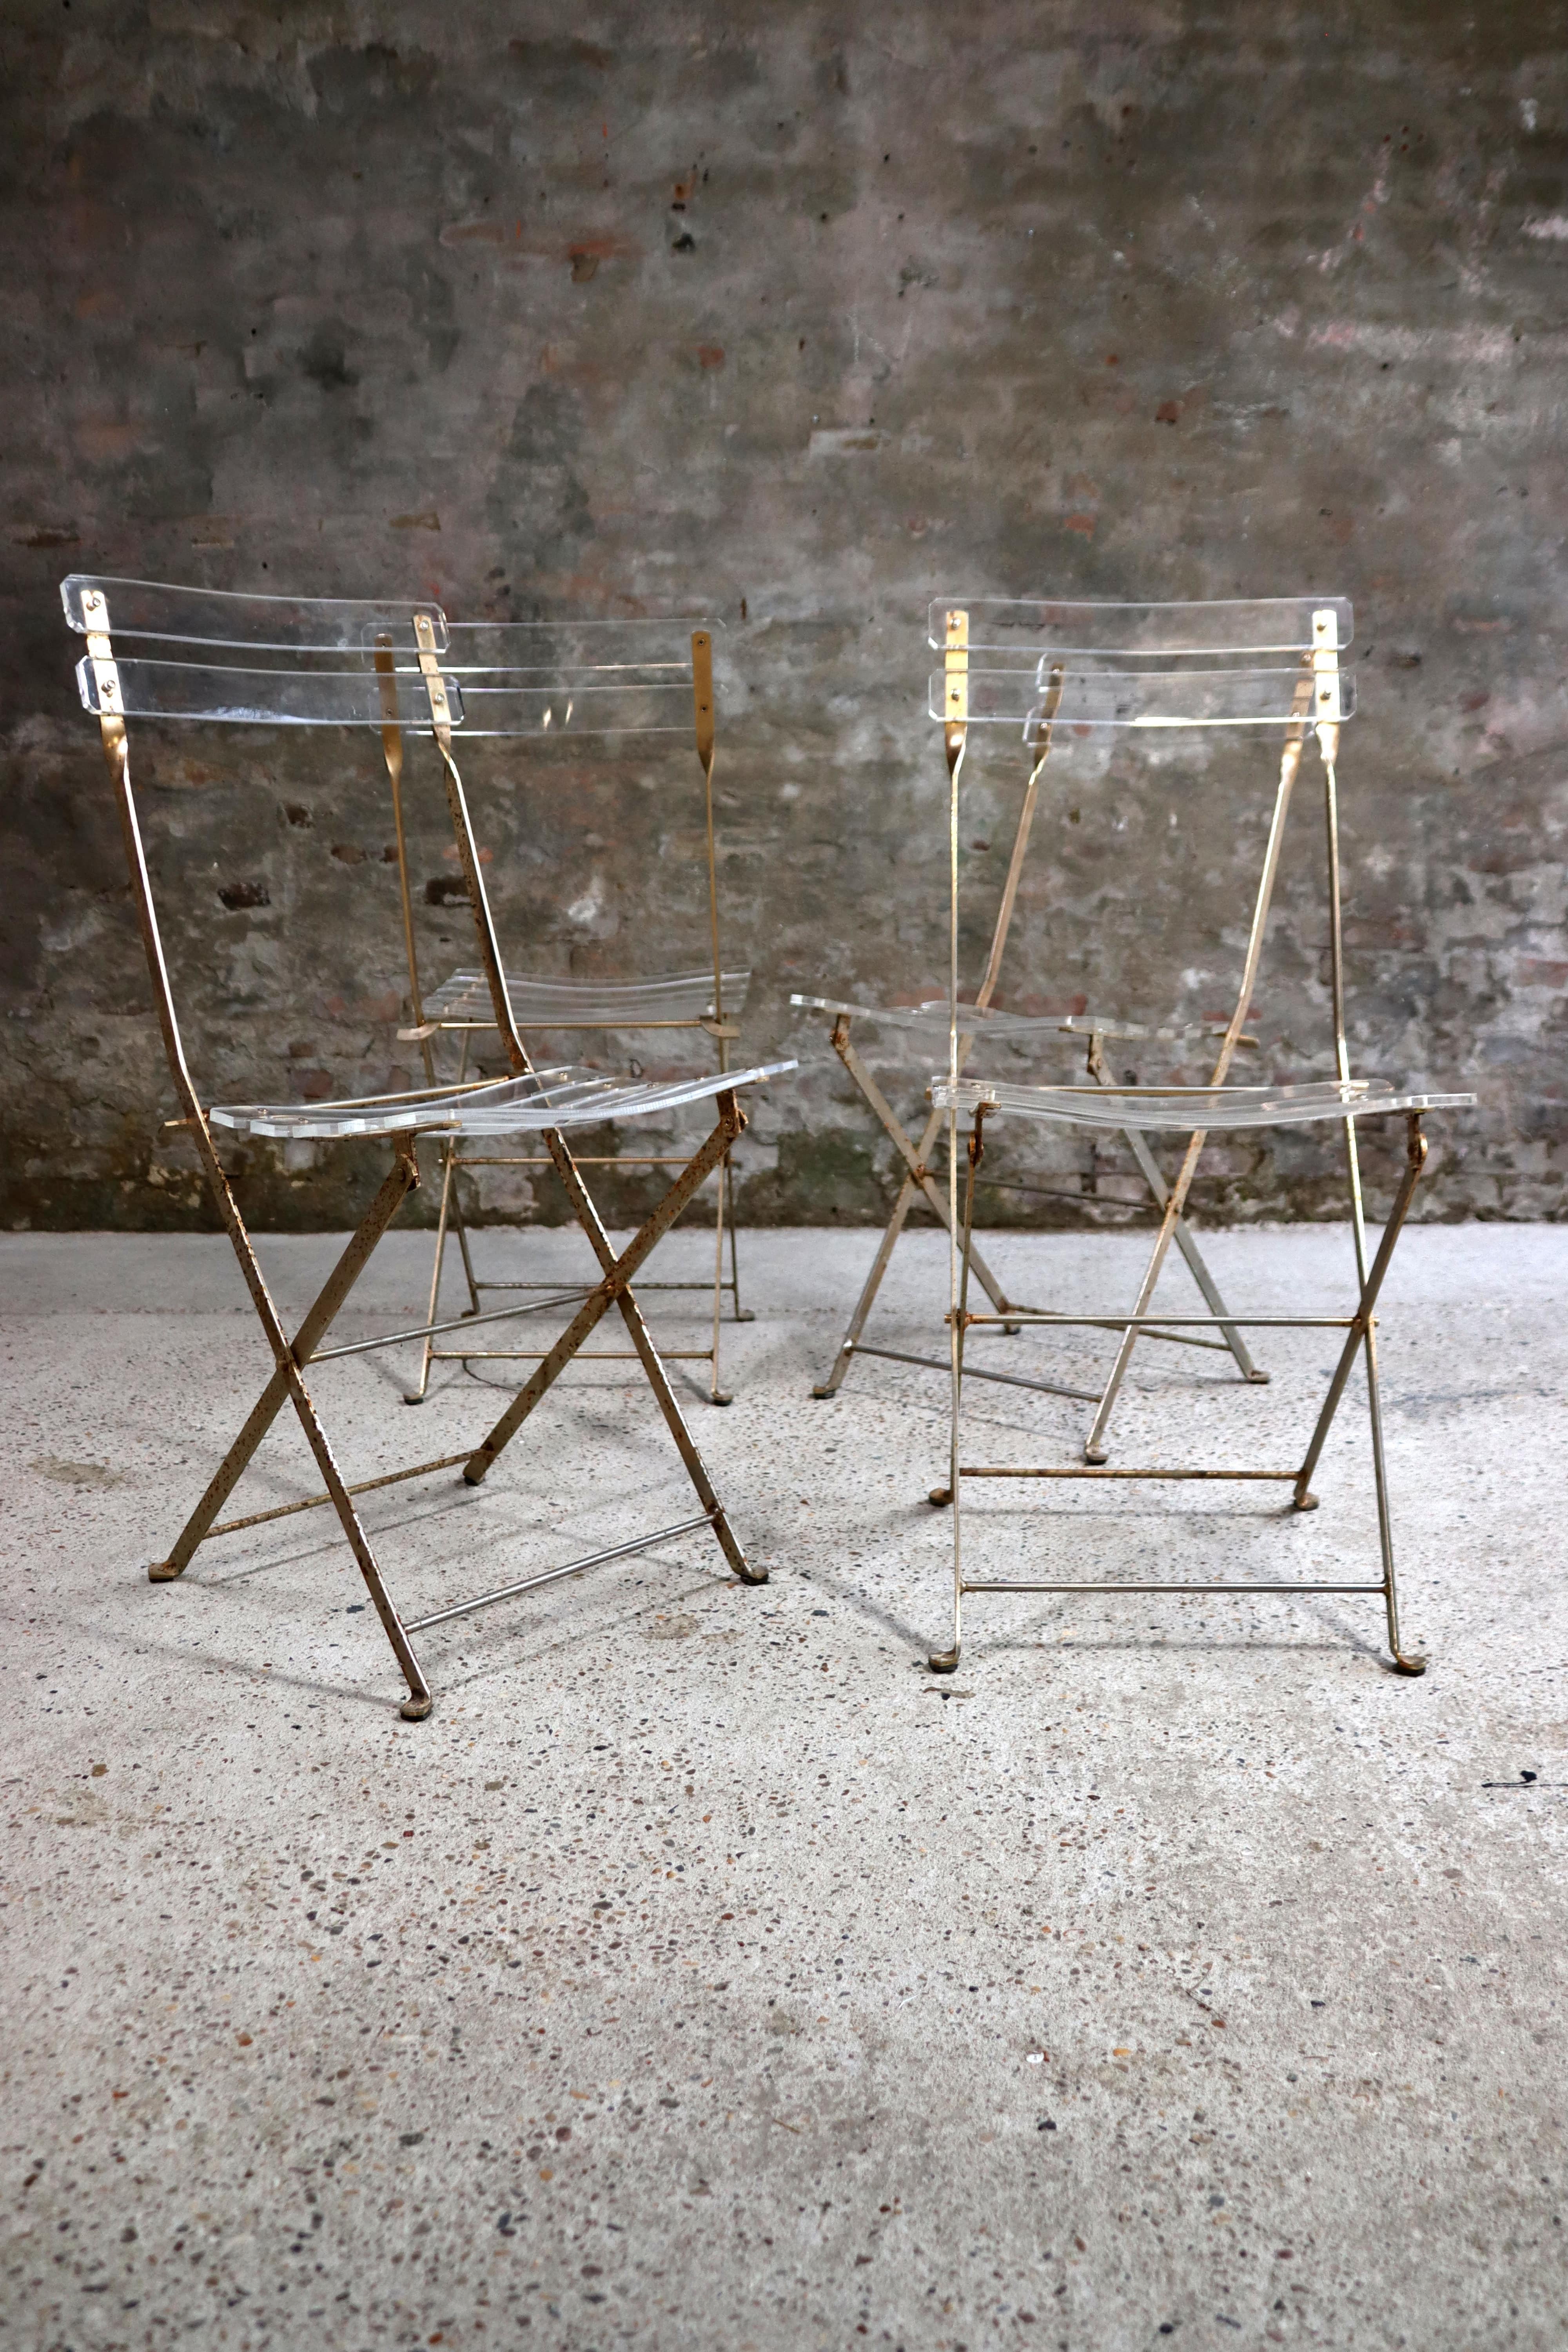 Yonel Lebovici (1937-1998) and Bernard Berthet designed these transparent folding chairs and gave this series the name: “Les Invisibles”. Made for Marais International in 1973. The white-gold color frame is made of steel and the slats are made of